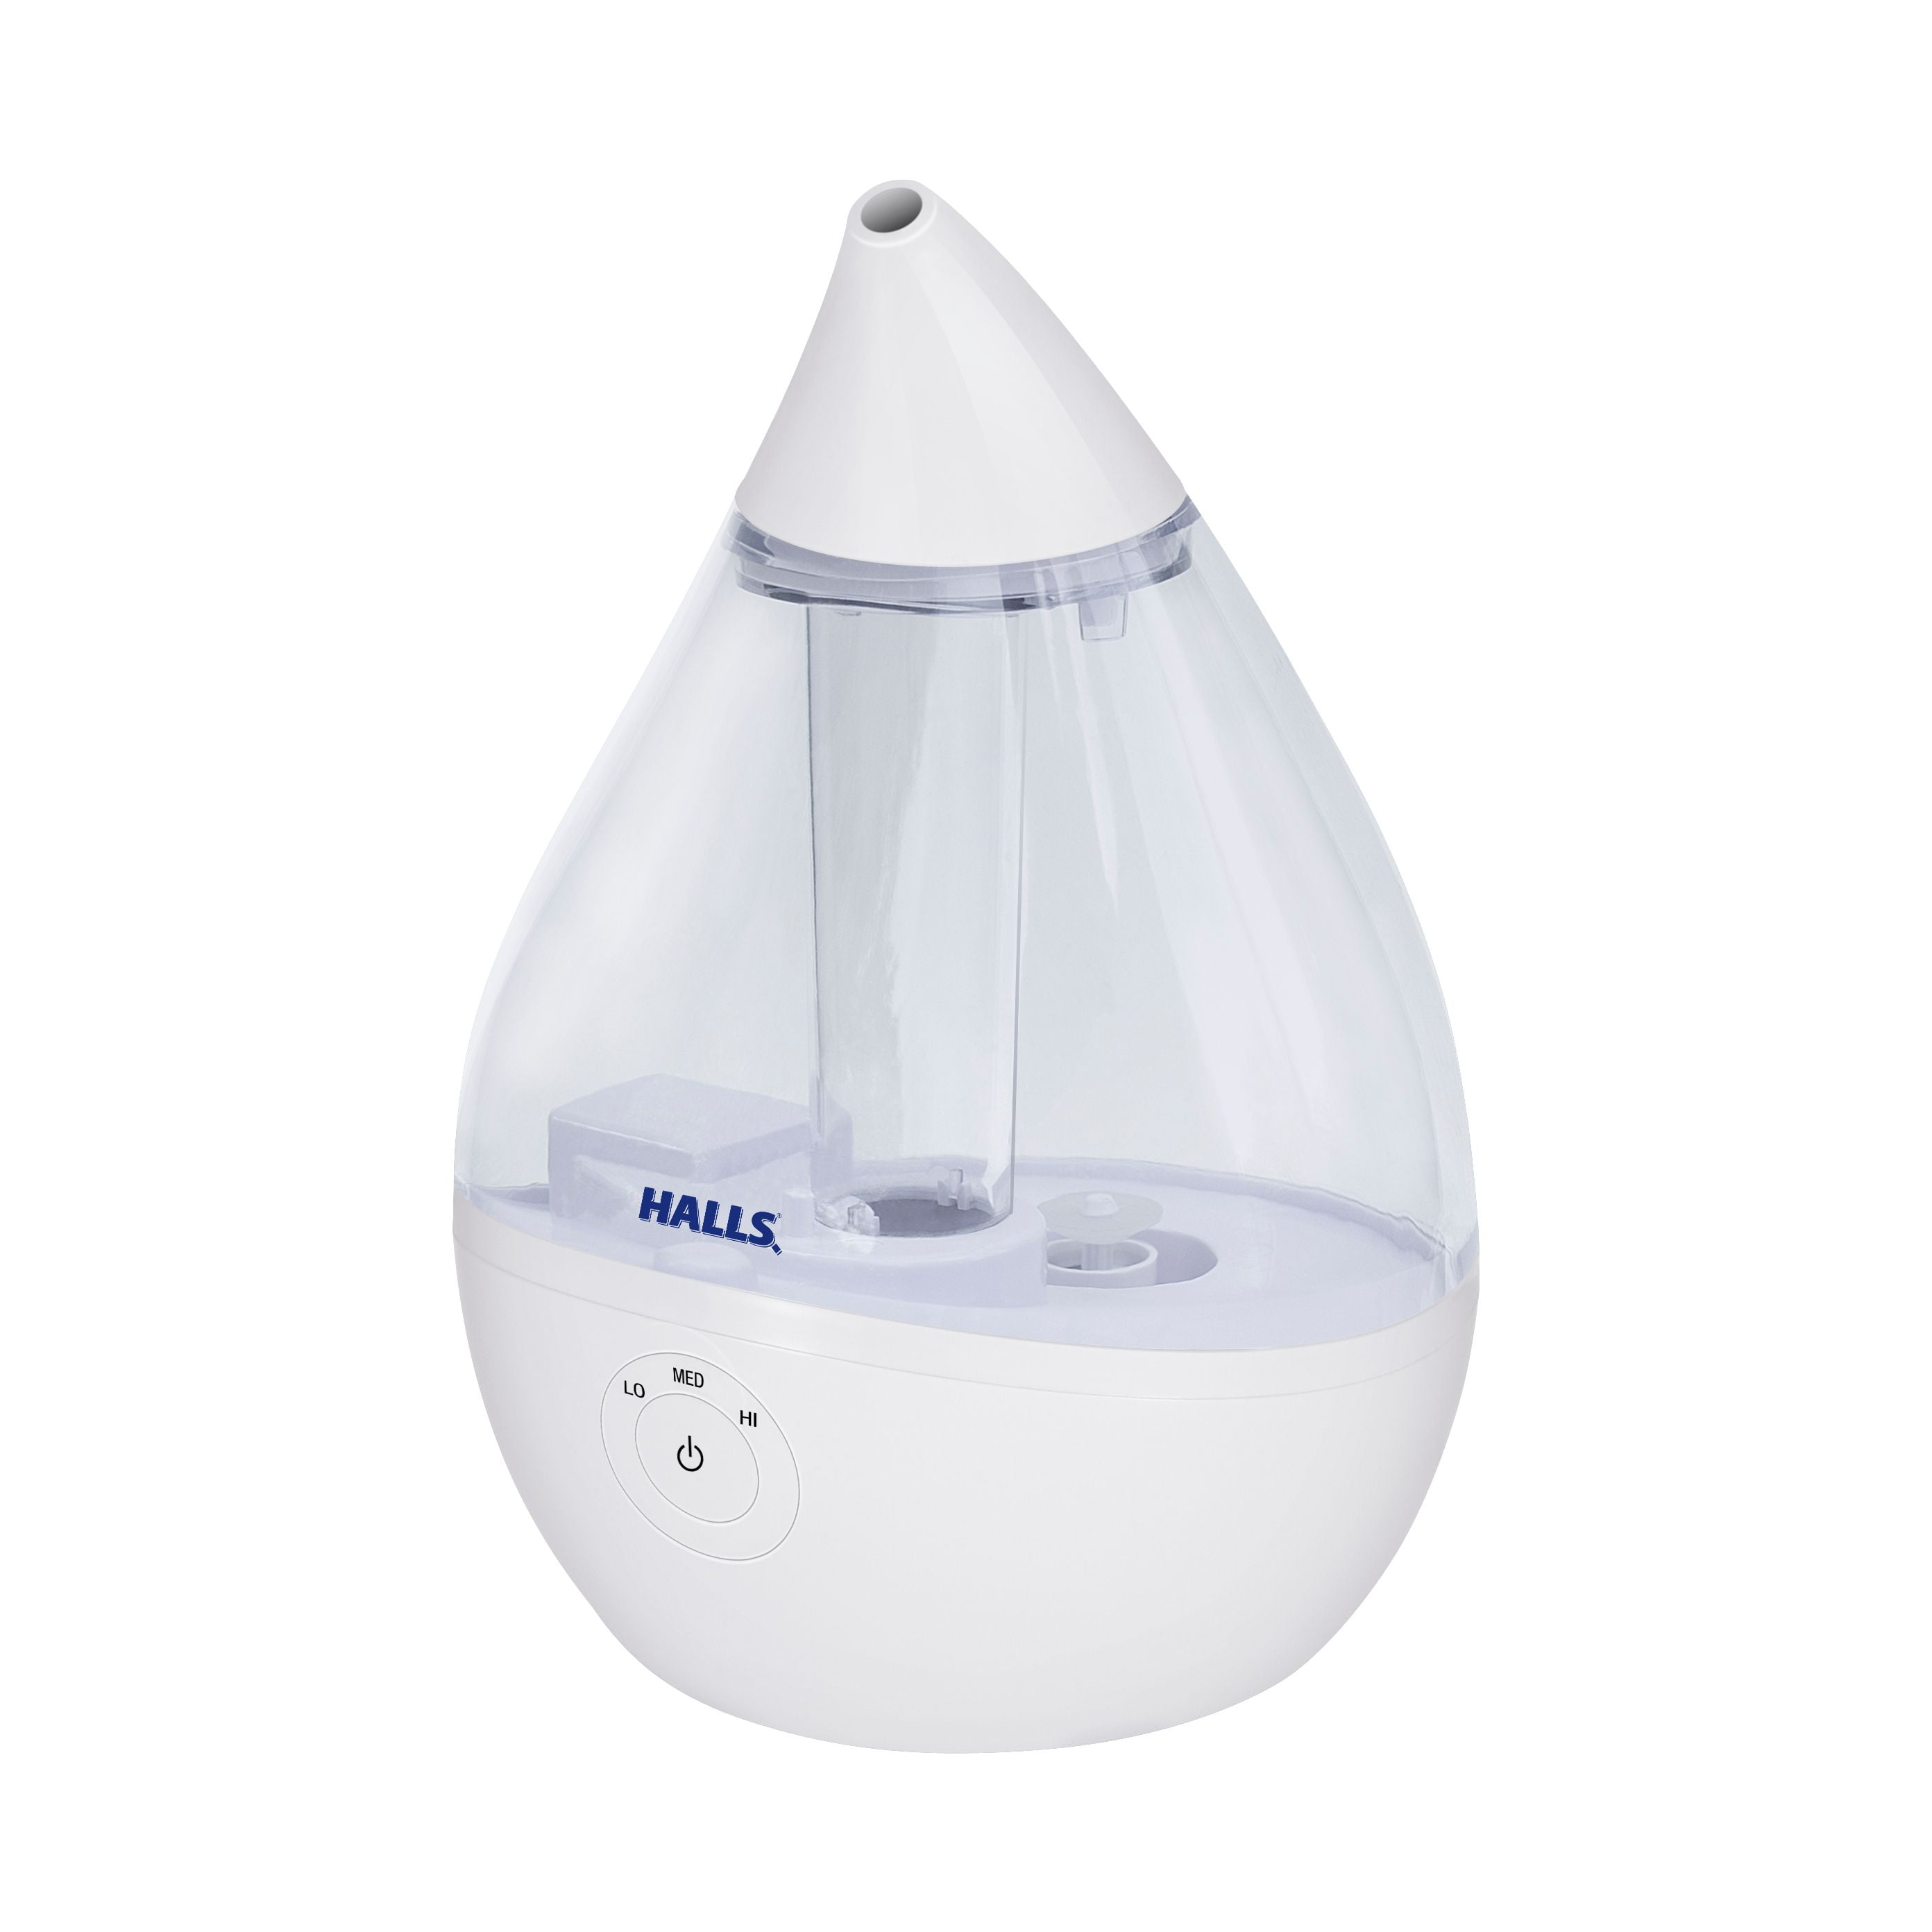 Crane x HALLS Droplet Cool Mist Humidifier, 0.5 GAL, Clear/White